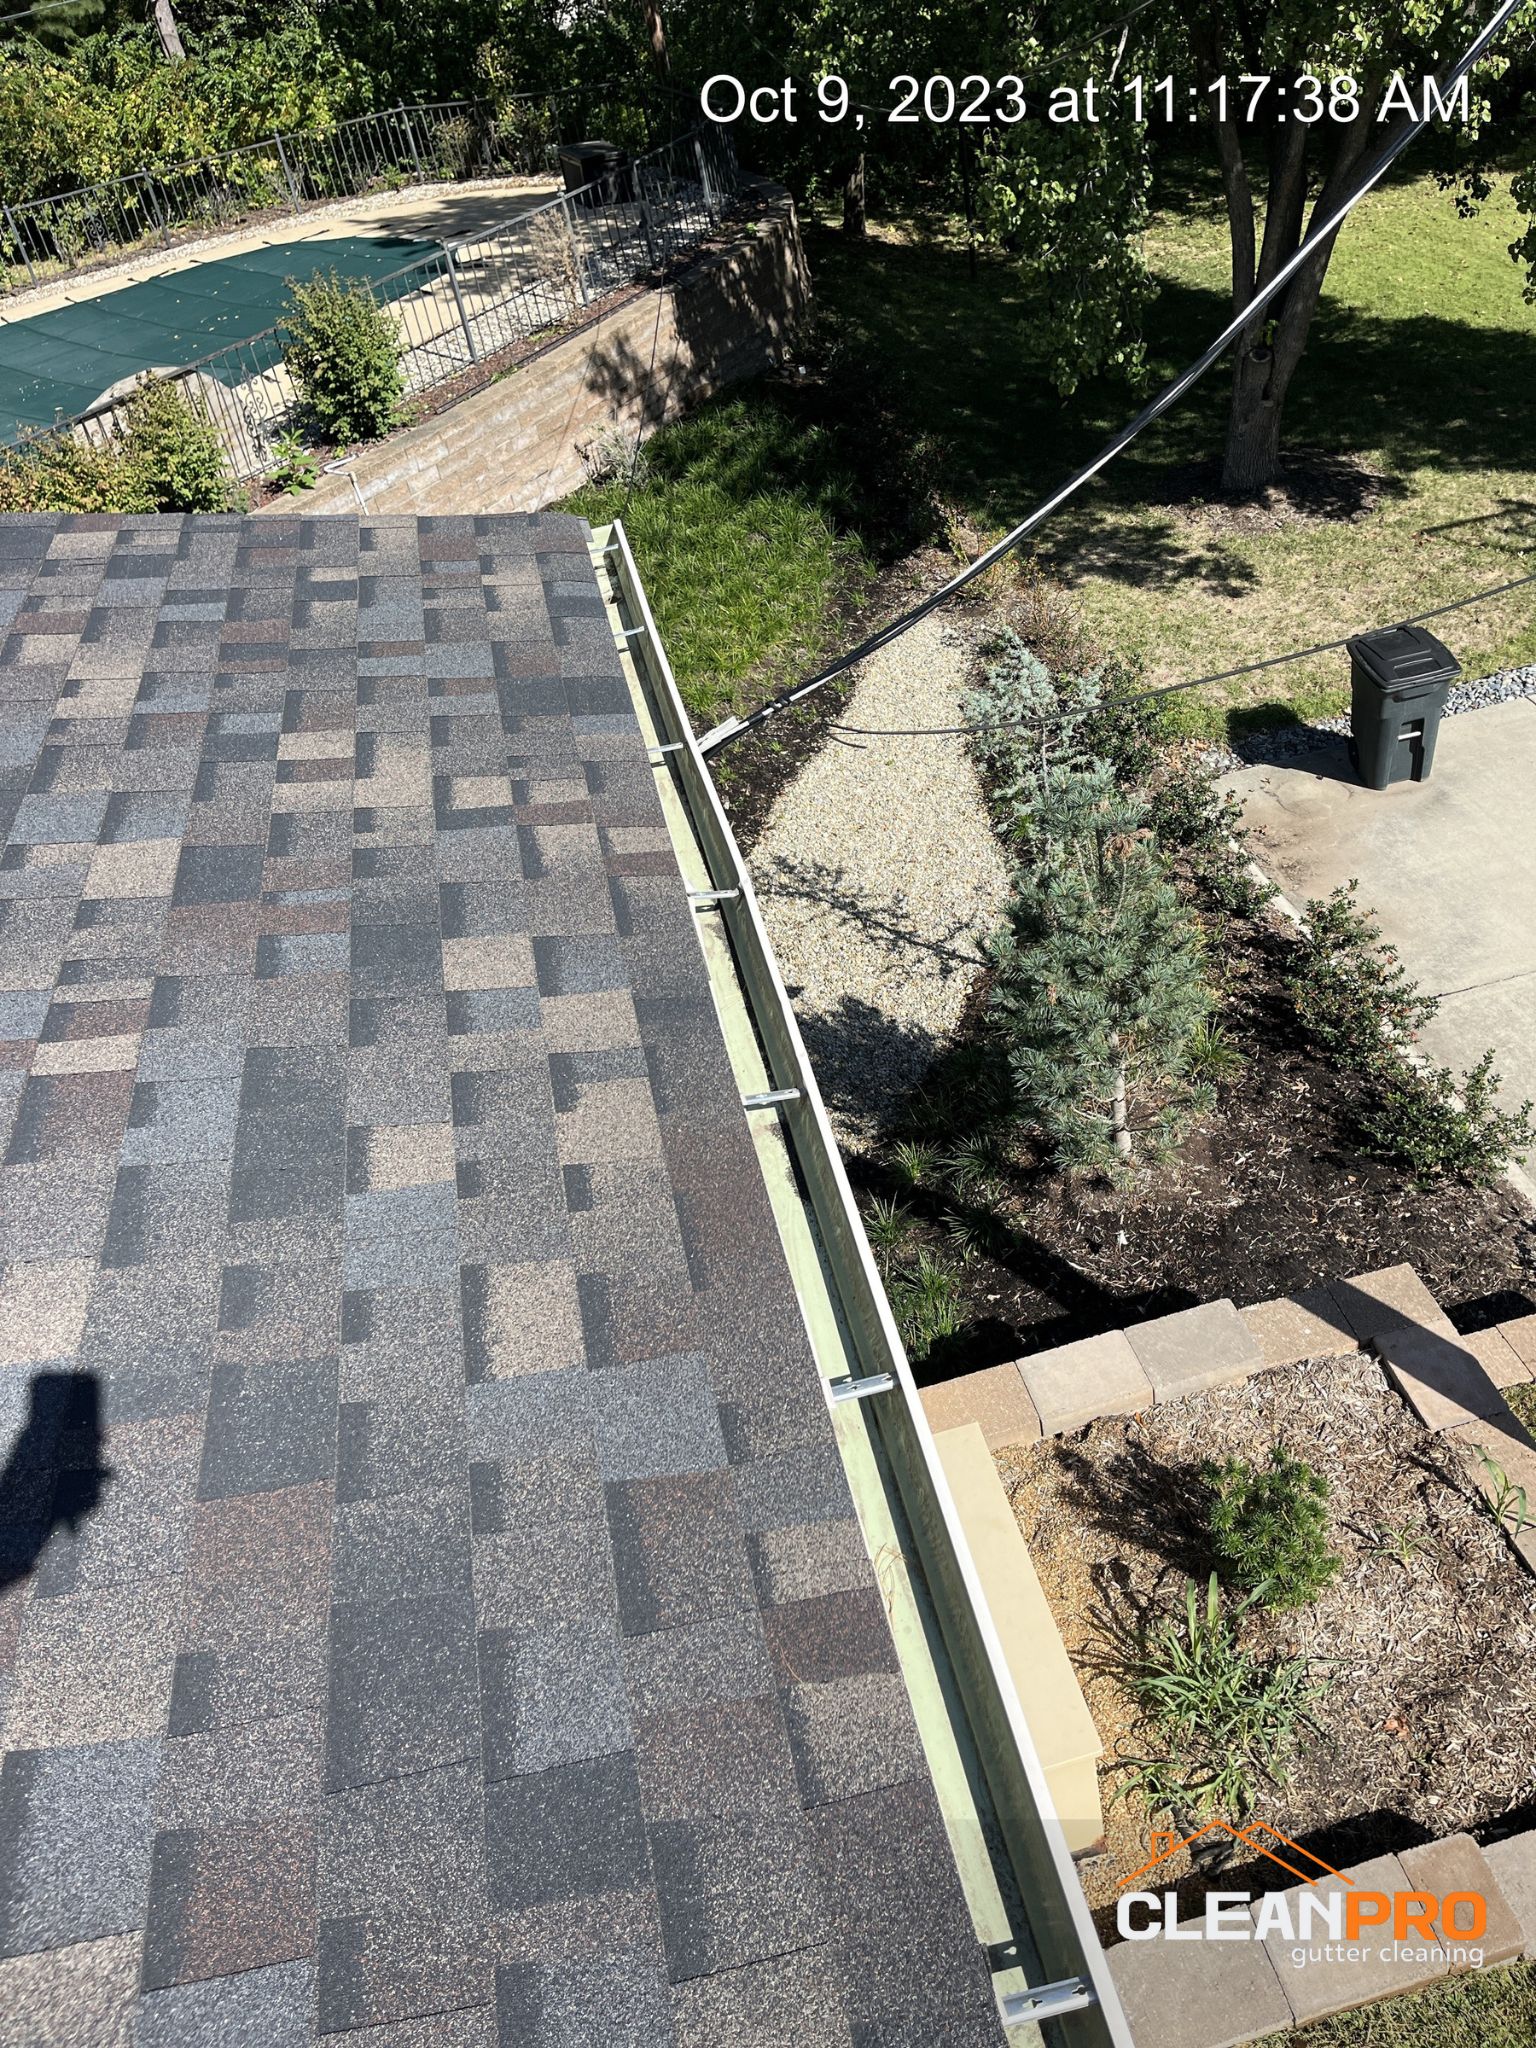 Local Gutter Cleaning in Madison